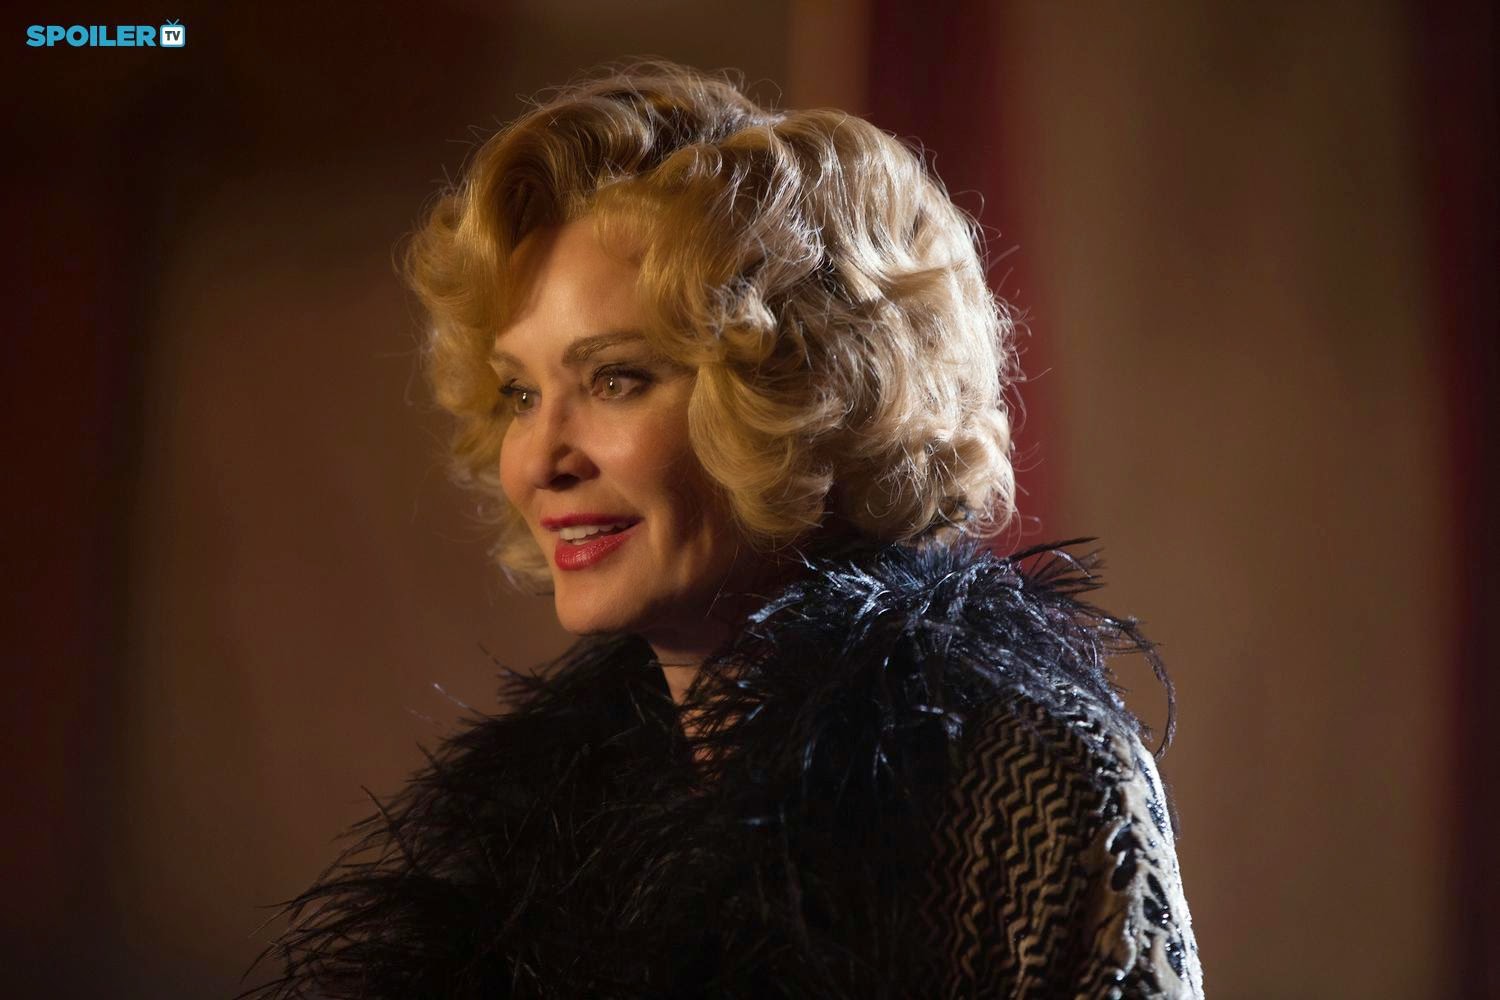 American Horror Story - Curtain Call (Season finale) - Review: "Stars never pay"